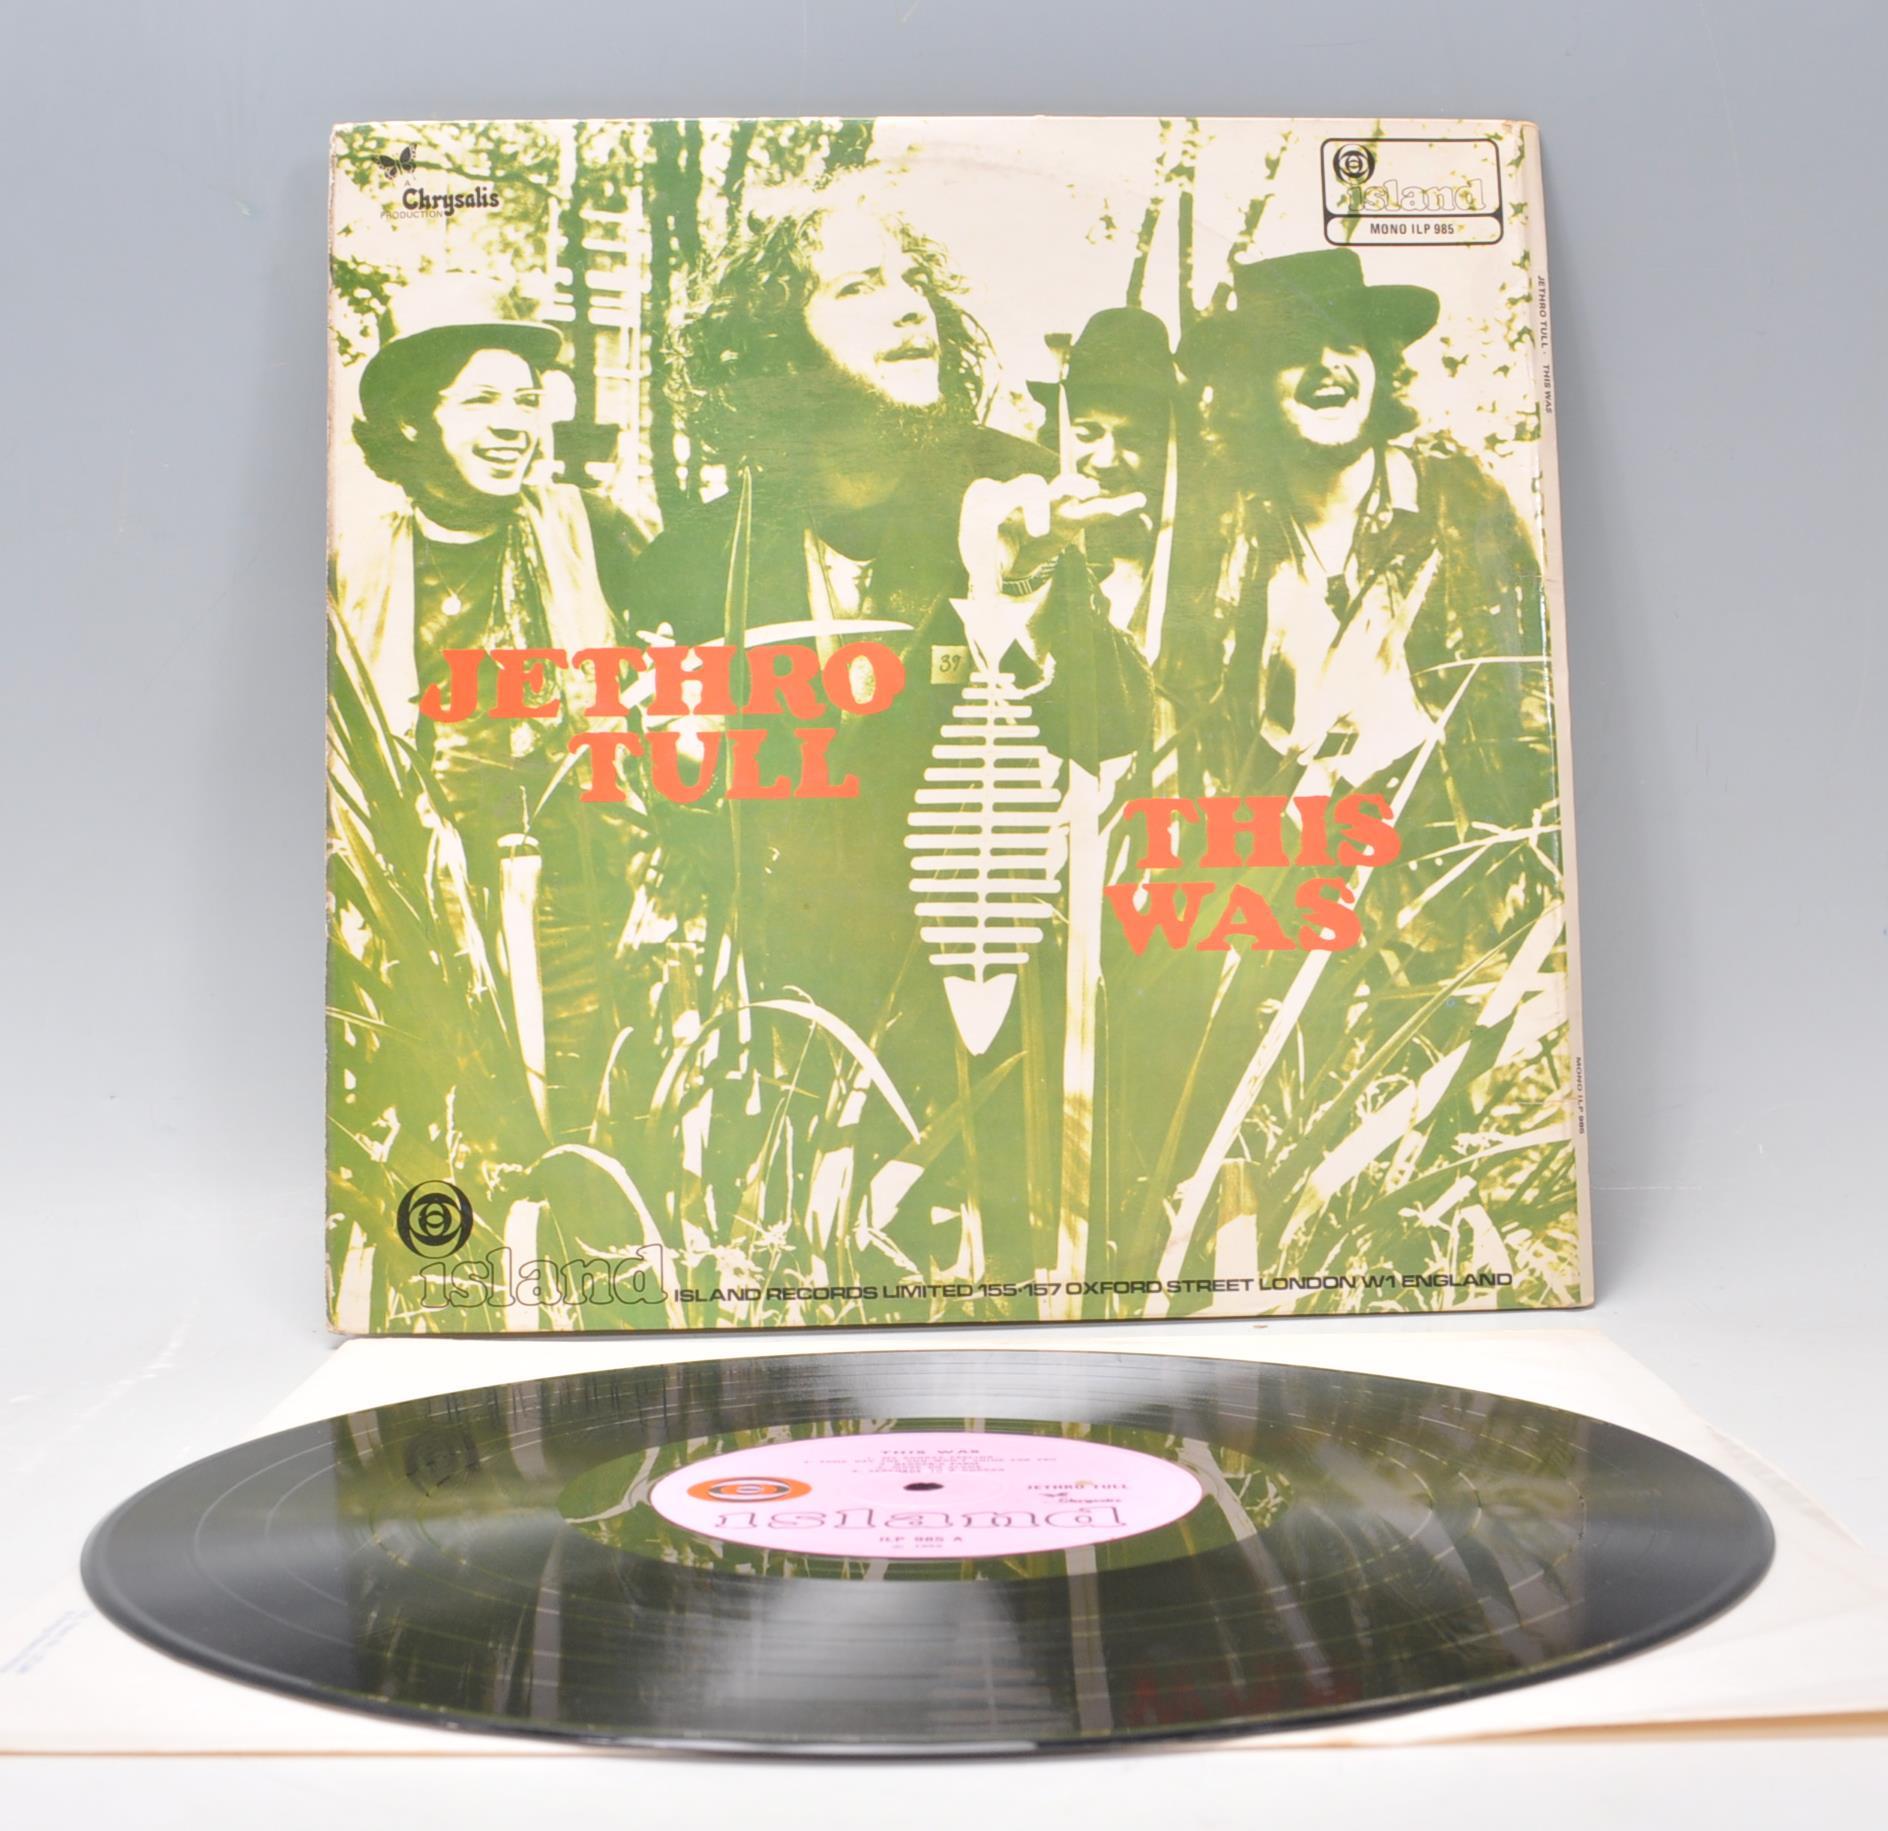 A vinyl long play LP record album by Jethro Tull – This Was – Original Island Records 1st U.K. Press - Image 3 of 5